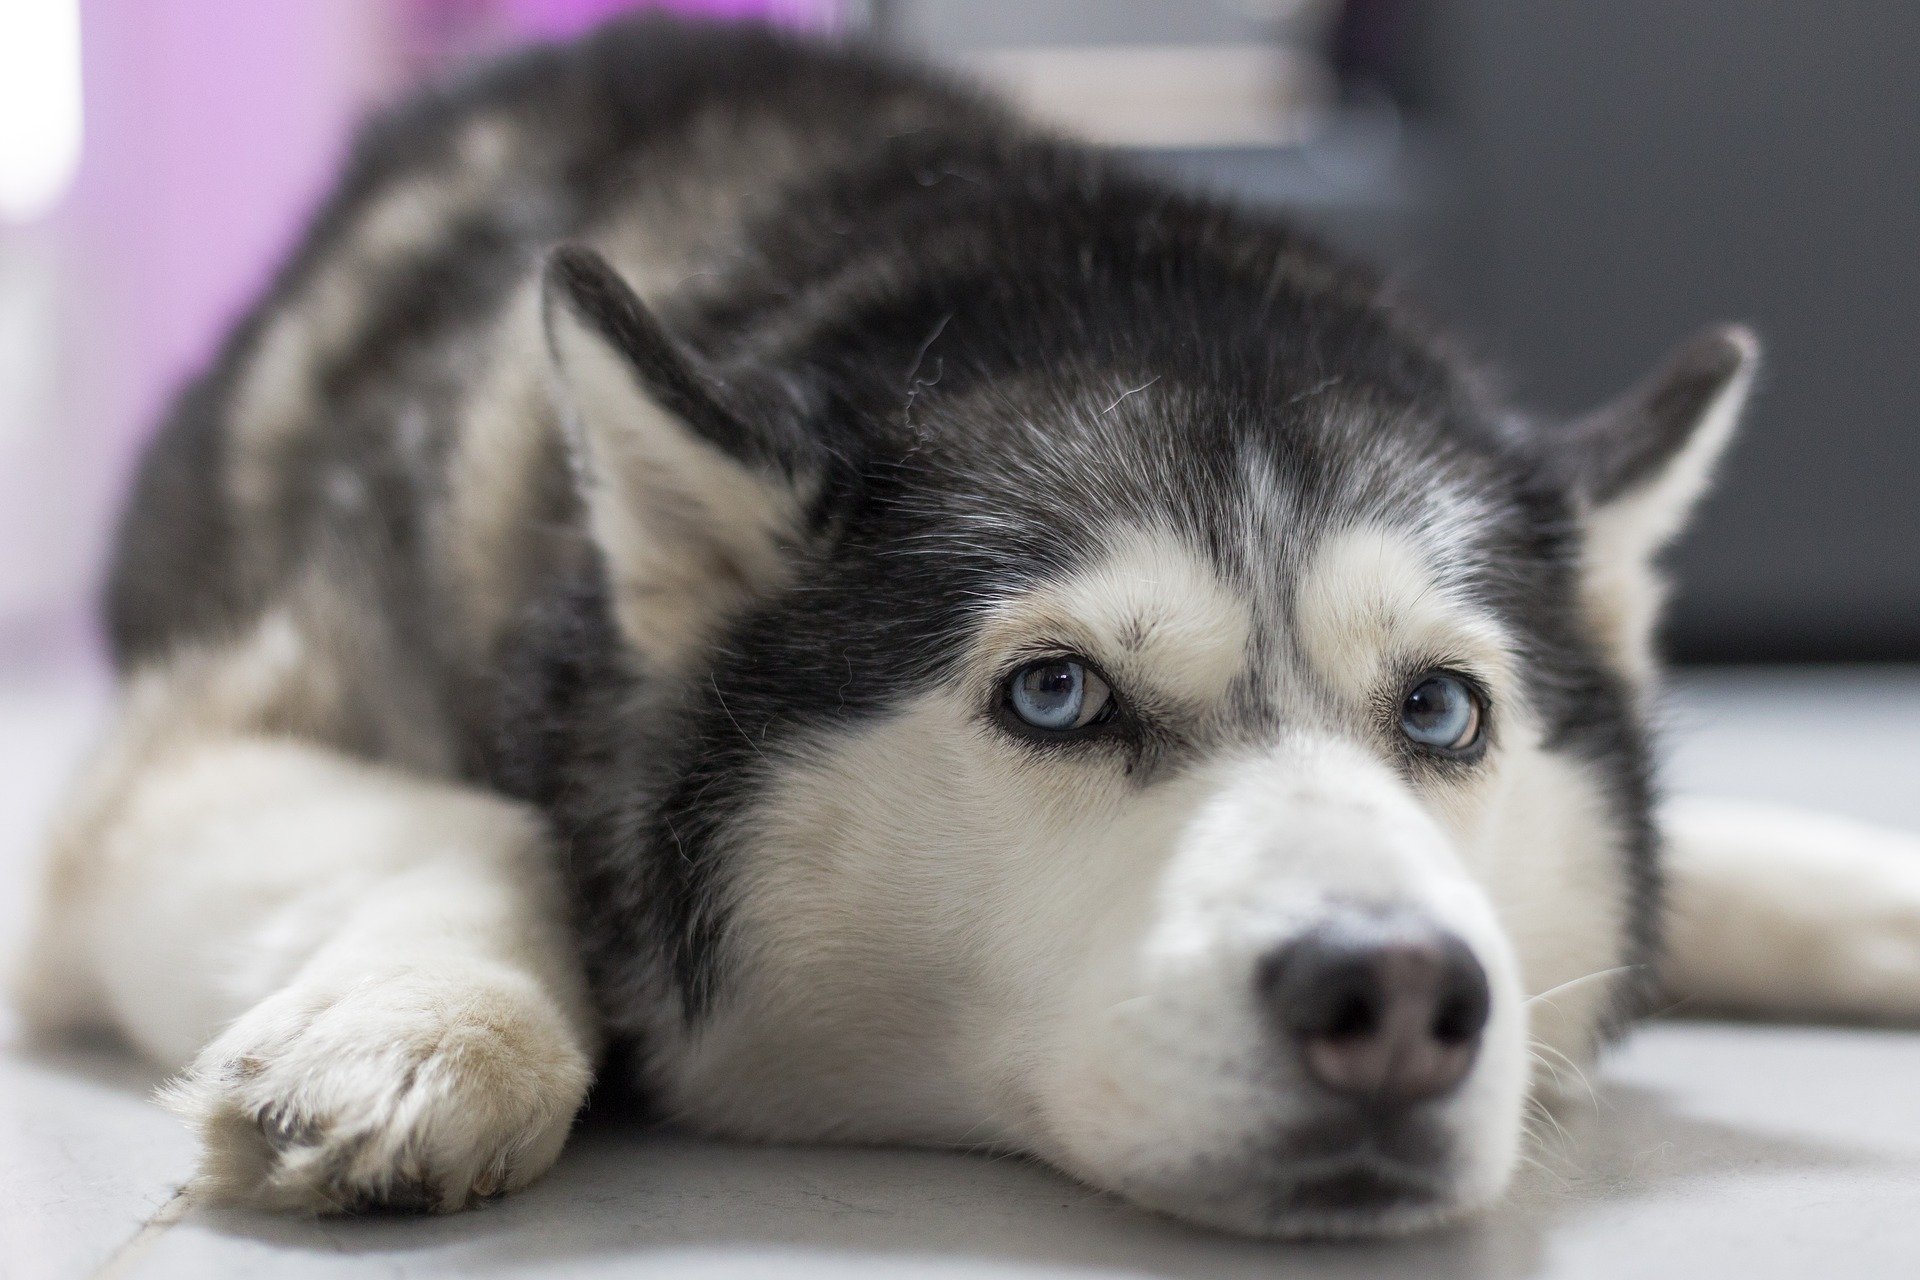 Goofy-Eyed Husky Rejected By Breeder...Is Now A Star